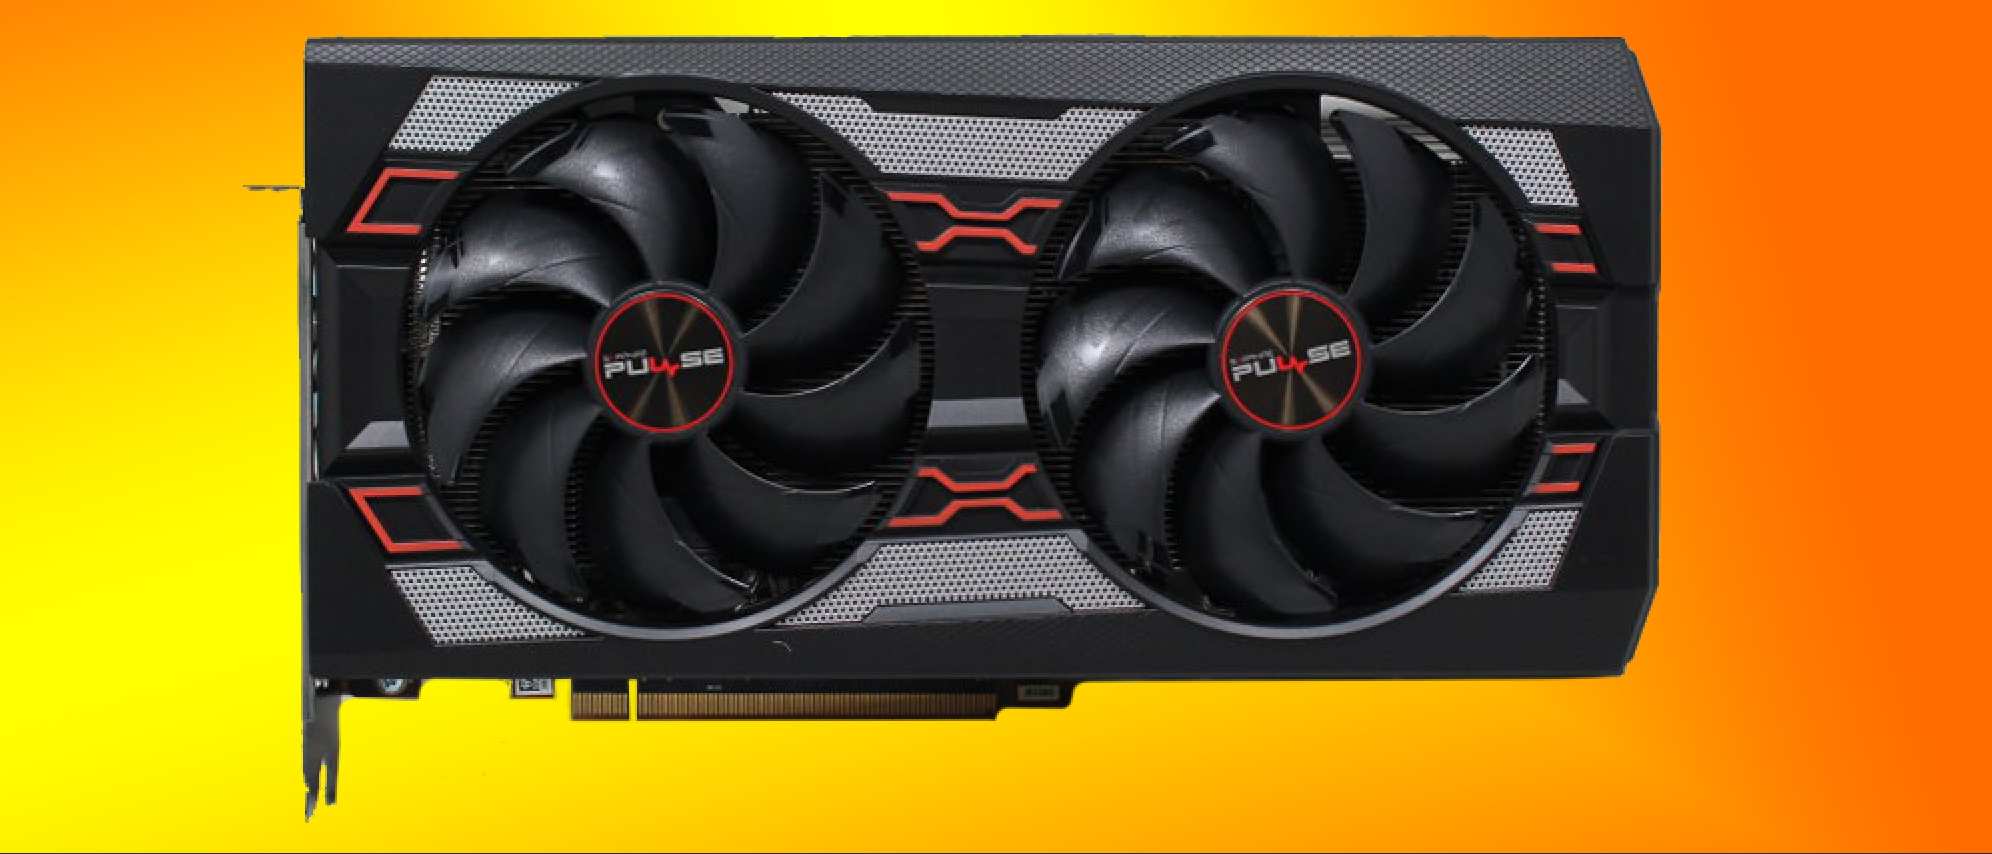 AMD Radeon RX 5600 XT Review: Look out, RTX 2060 | Tom's Hardware